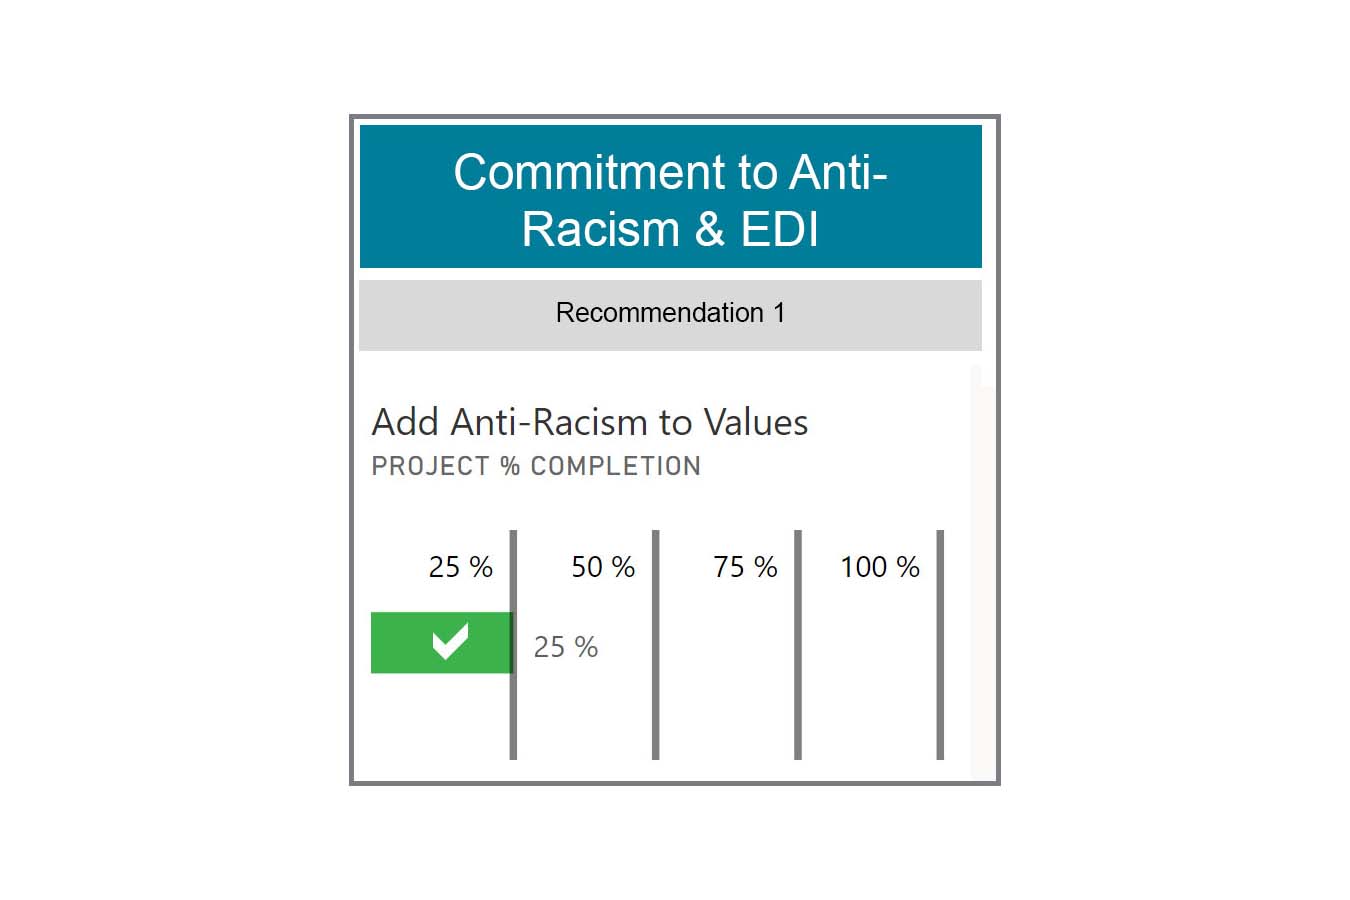 Commitment to Anti-Racisms and EDI Recommendation 1 graphic